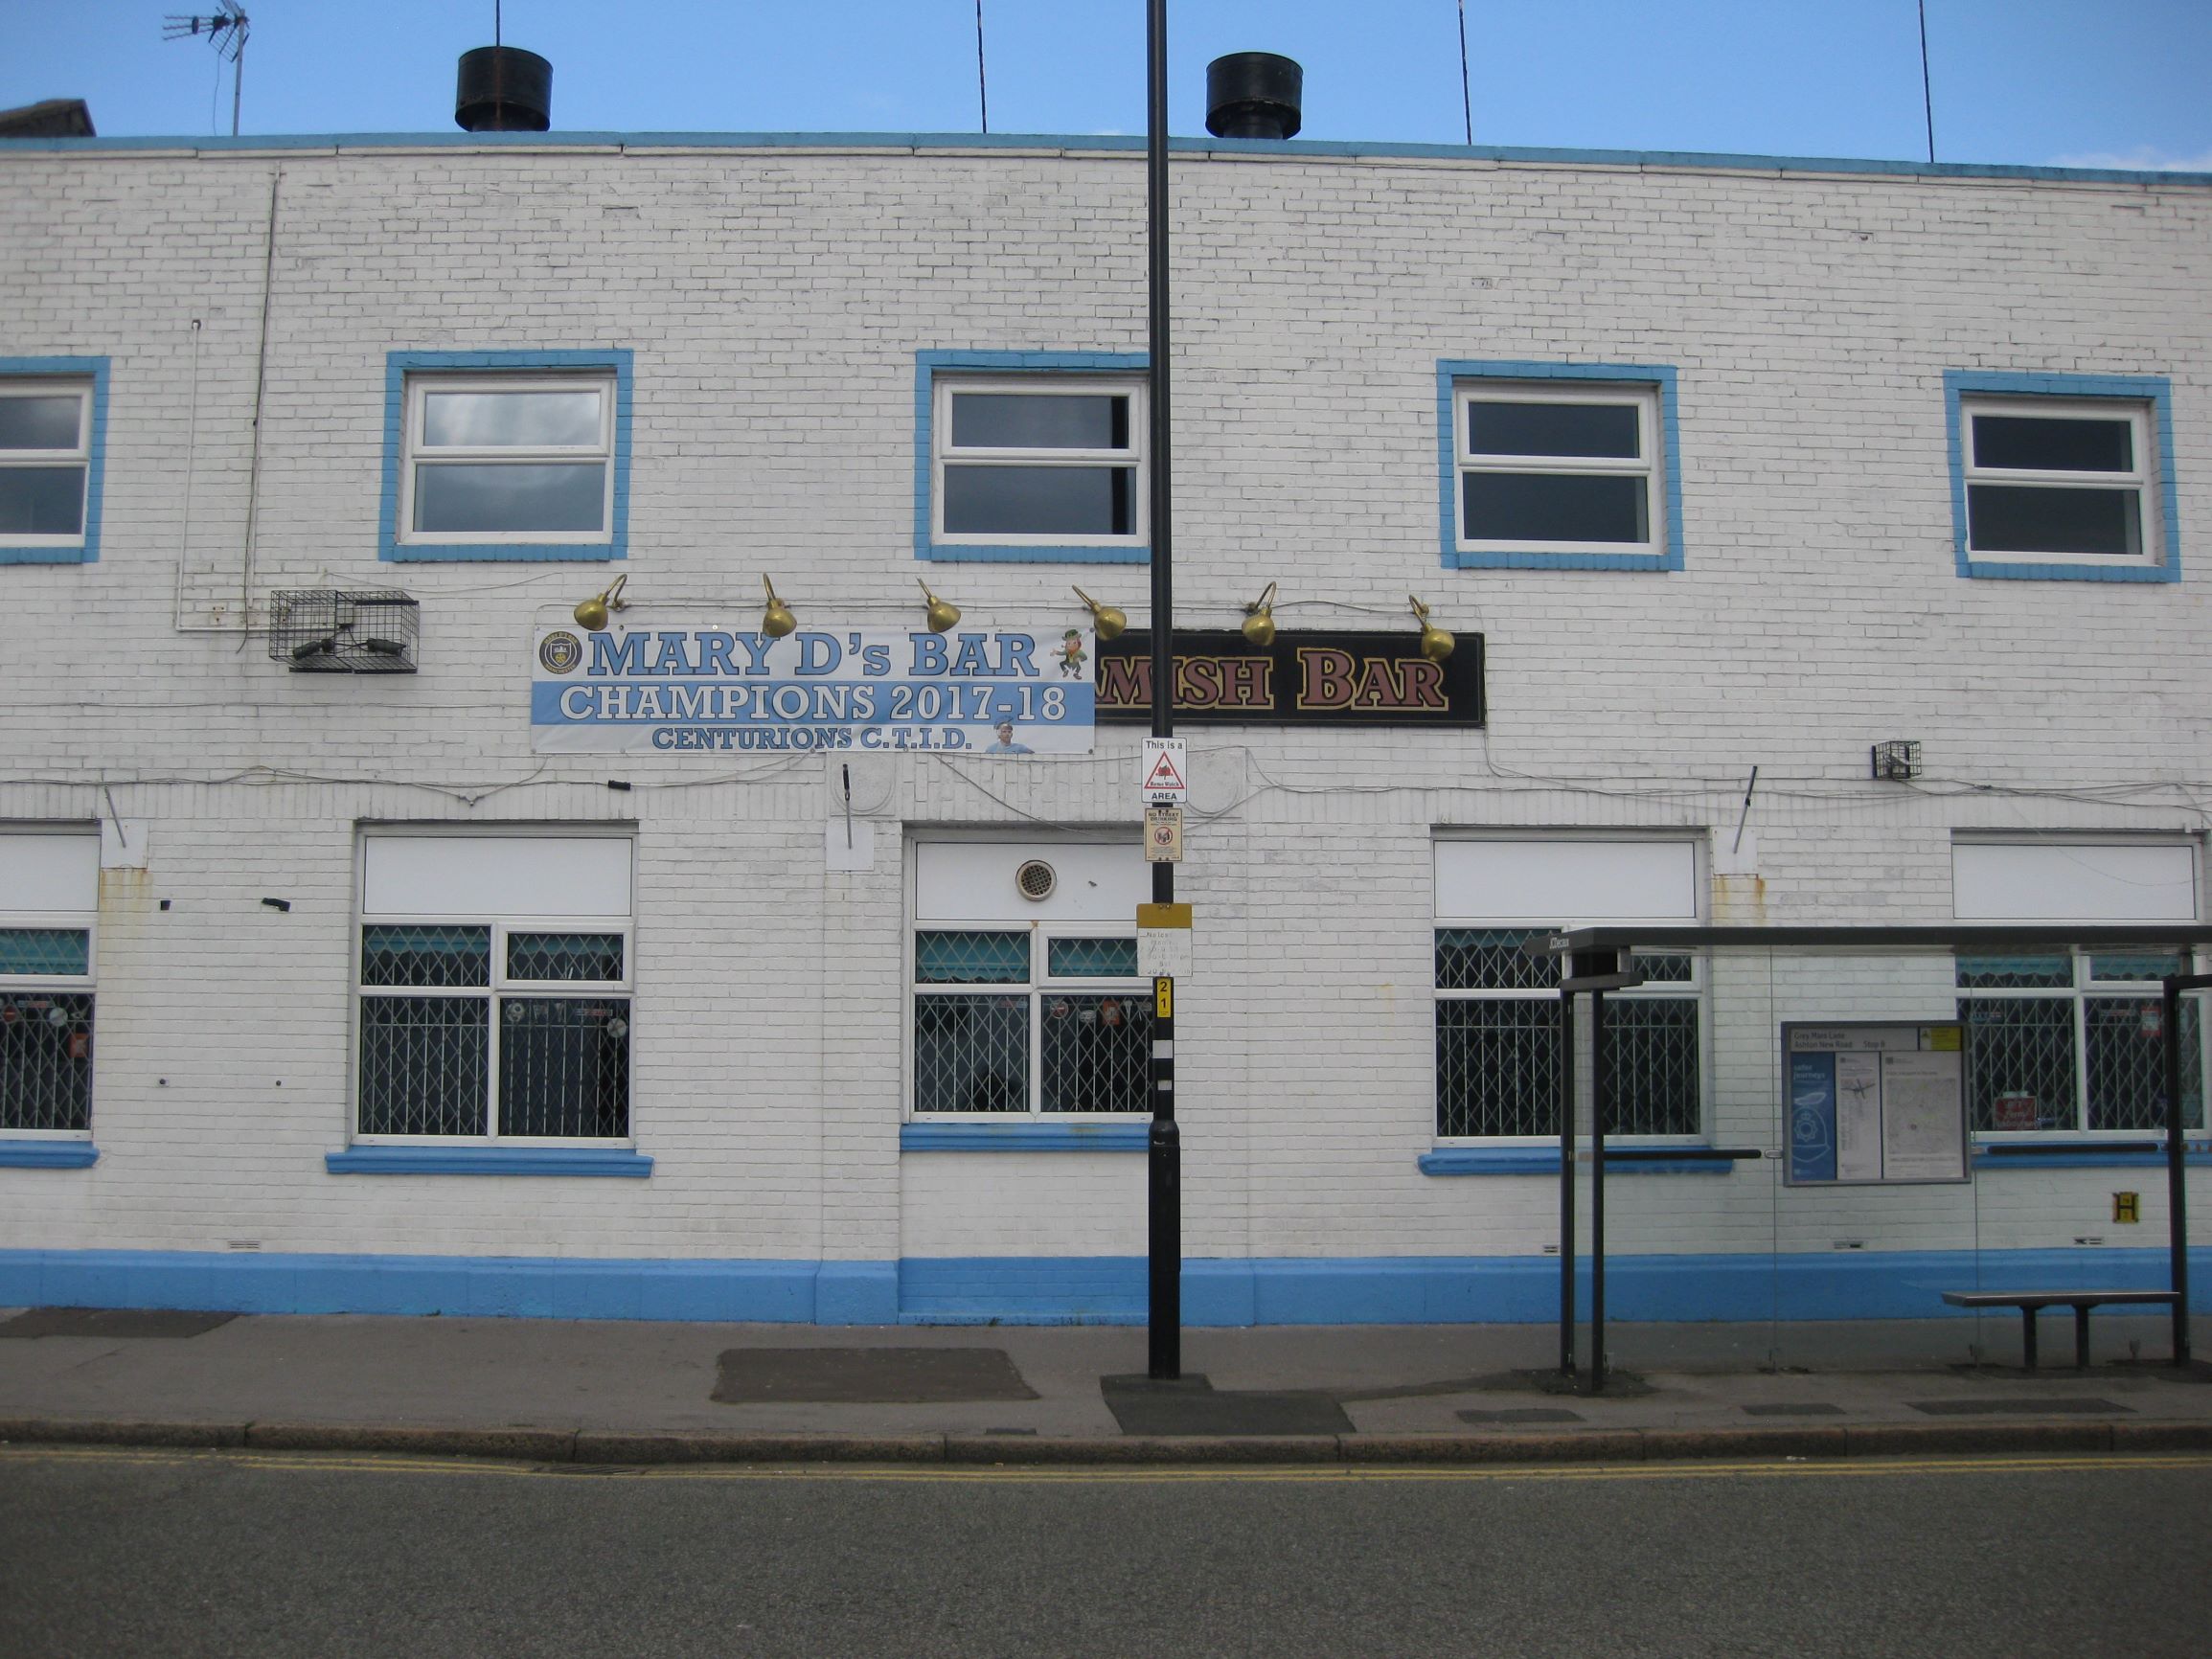 Mary D's bar, once the Bradford Labour Club, is usually populated by Manchester United fans (Oscar Rickett/MEE)